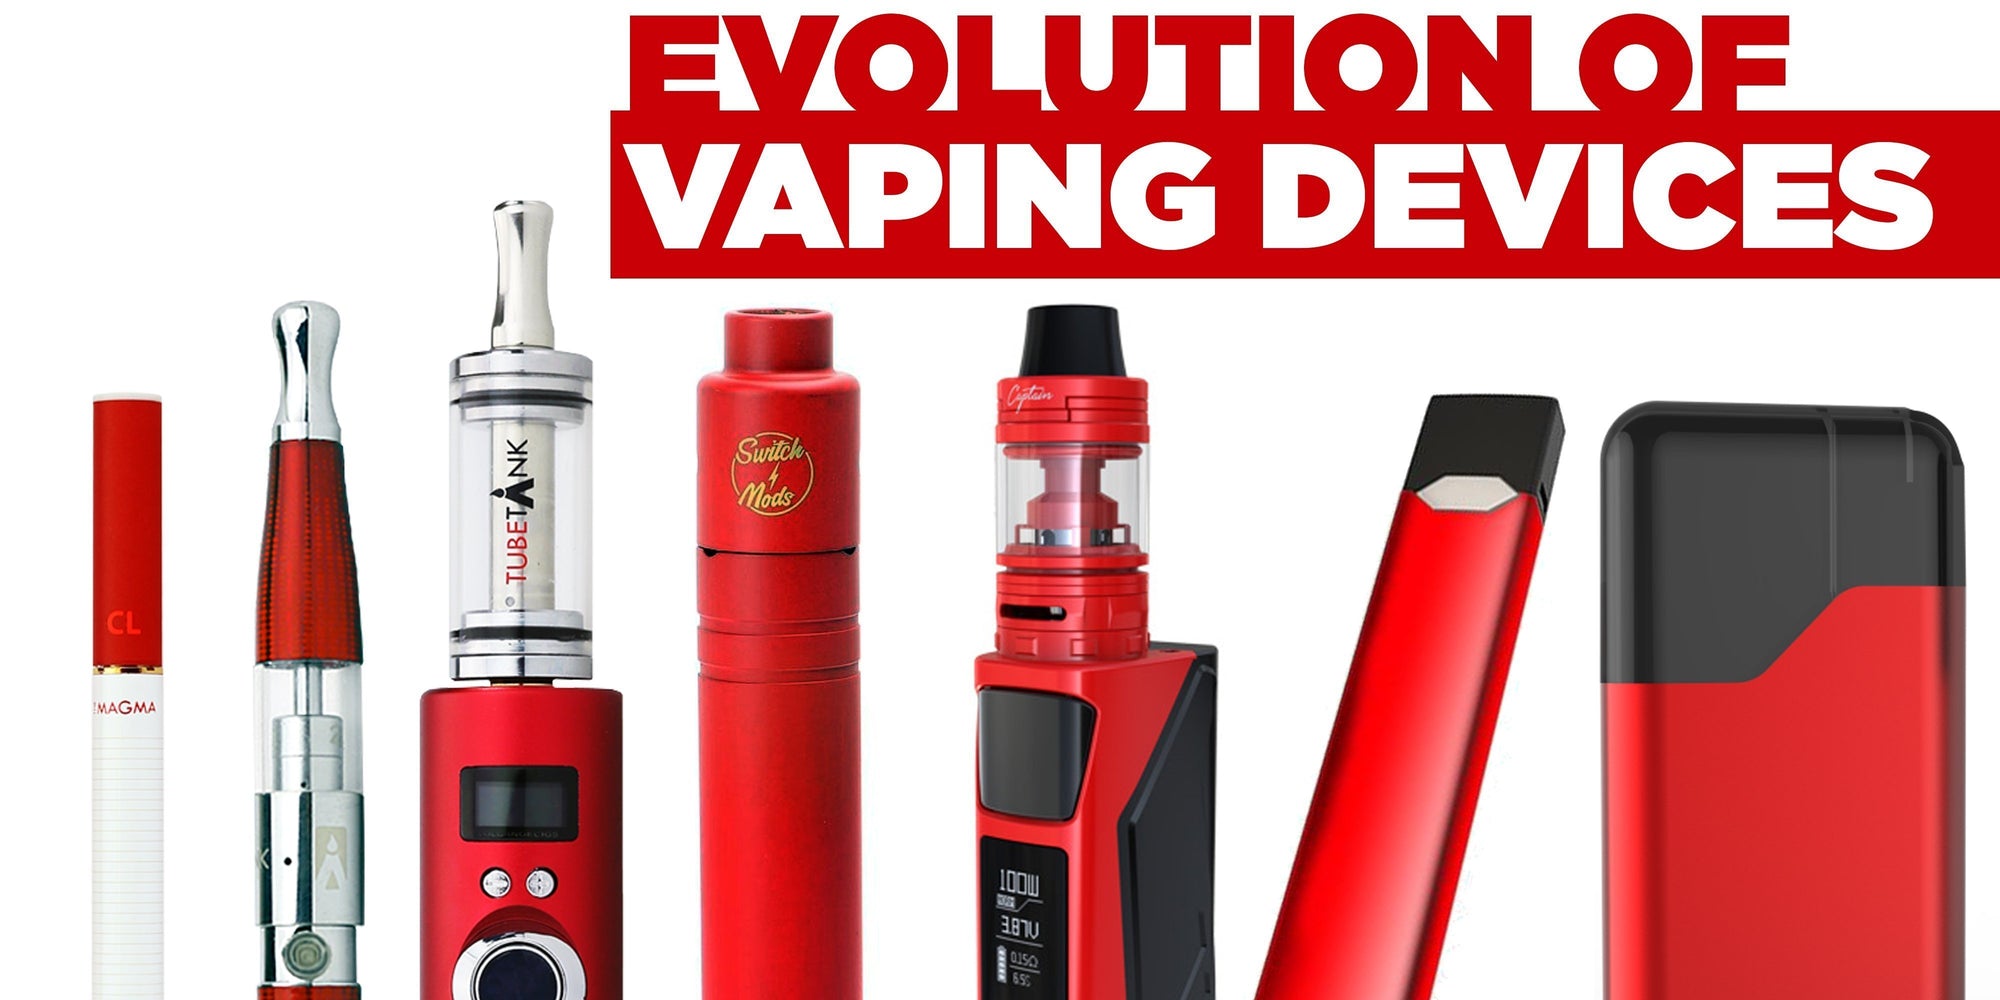 Evolution of Vaping Devices